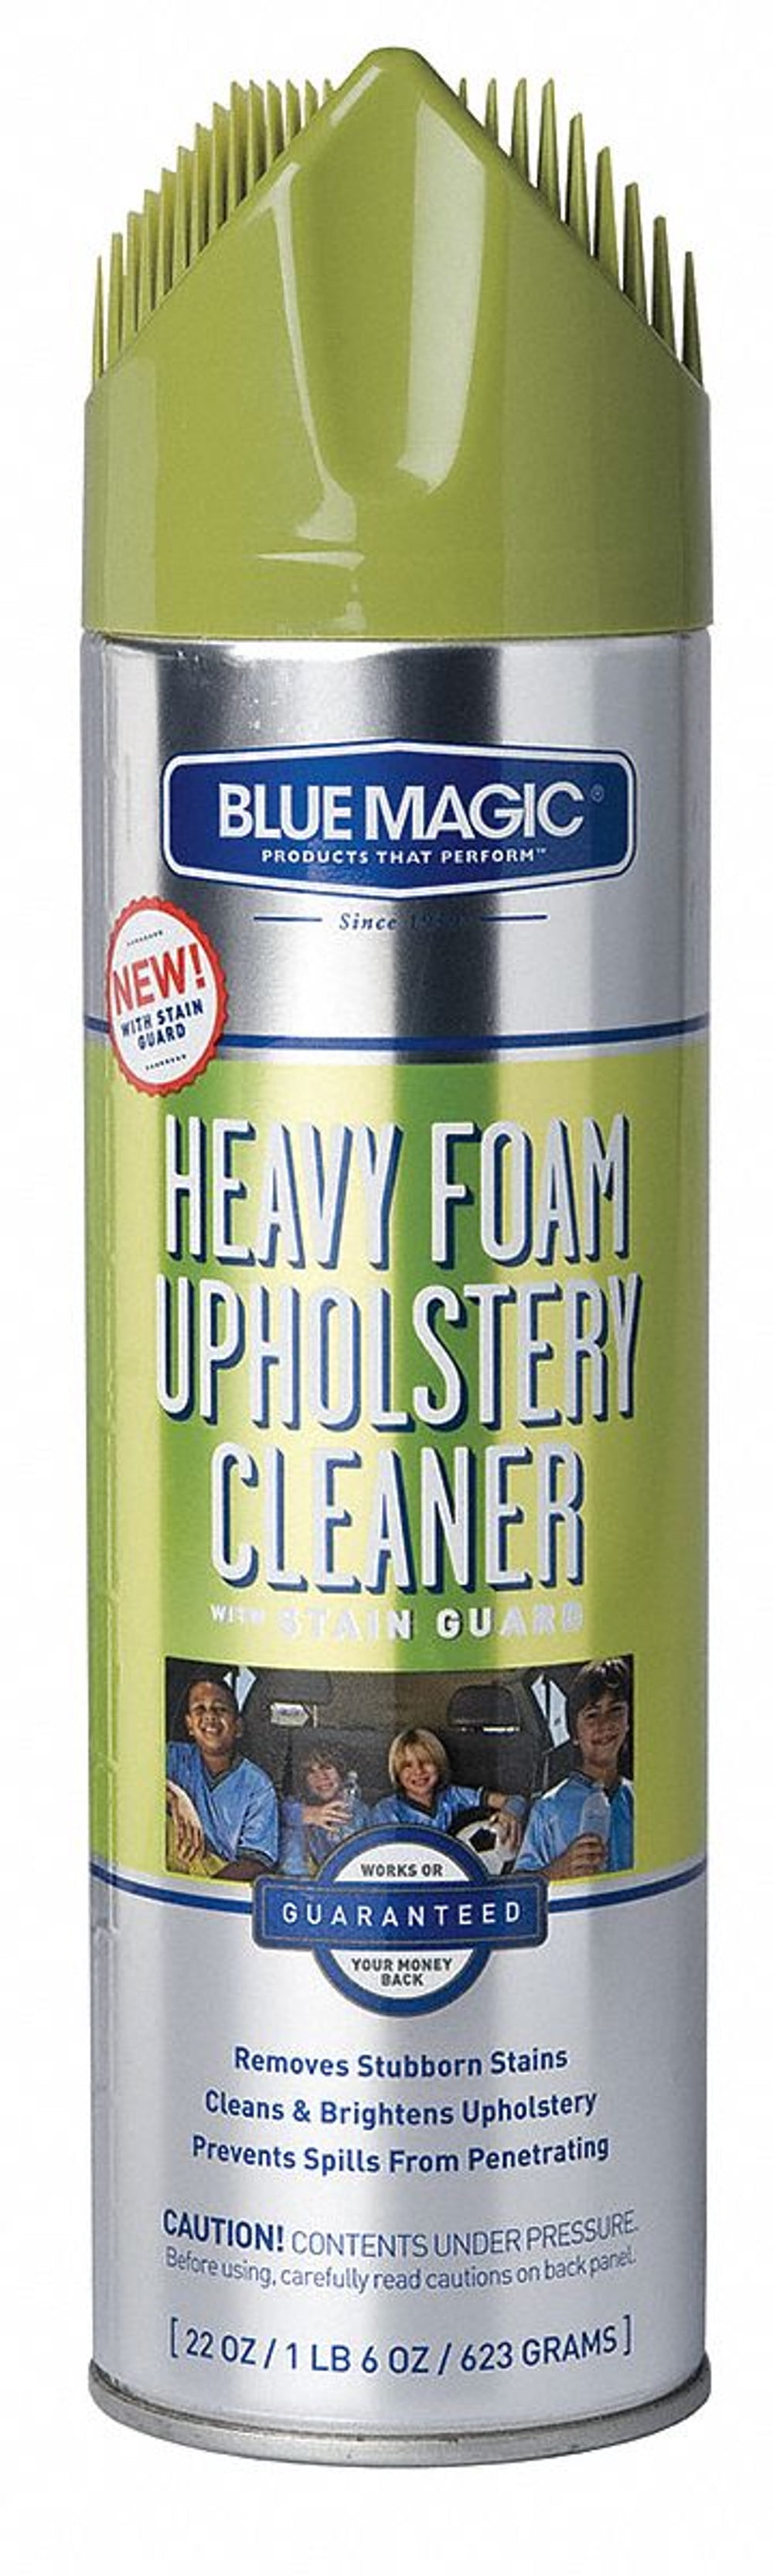 1PACK Blue Magic Foam Upholstery Cleaner with Stain Guard 914-06 914-06  ZO-G0683155 